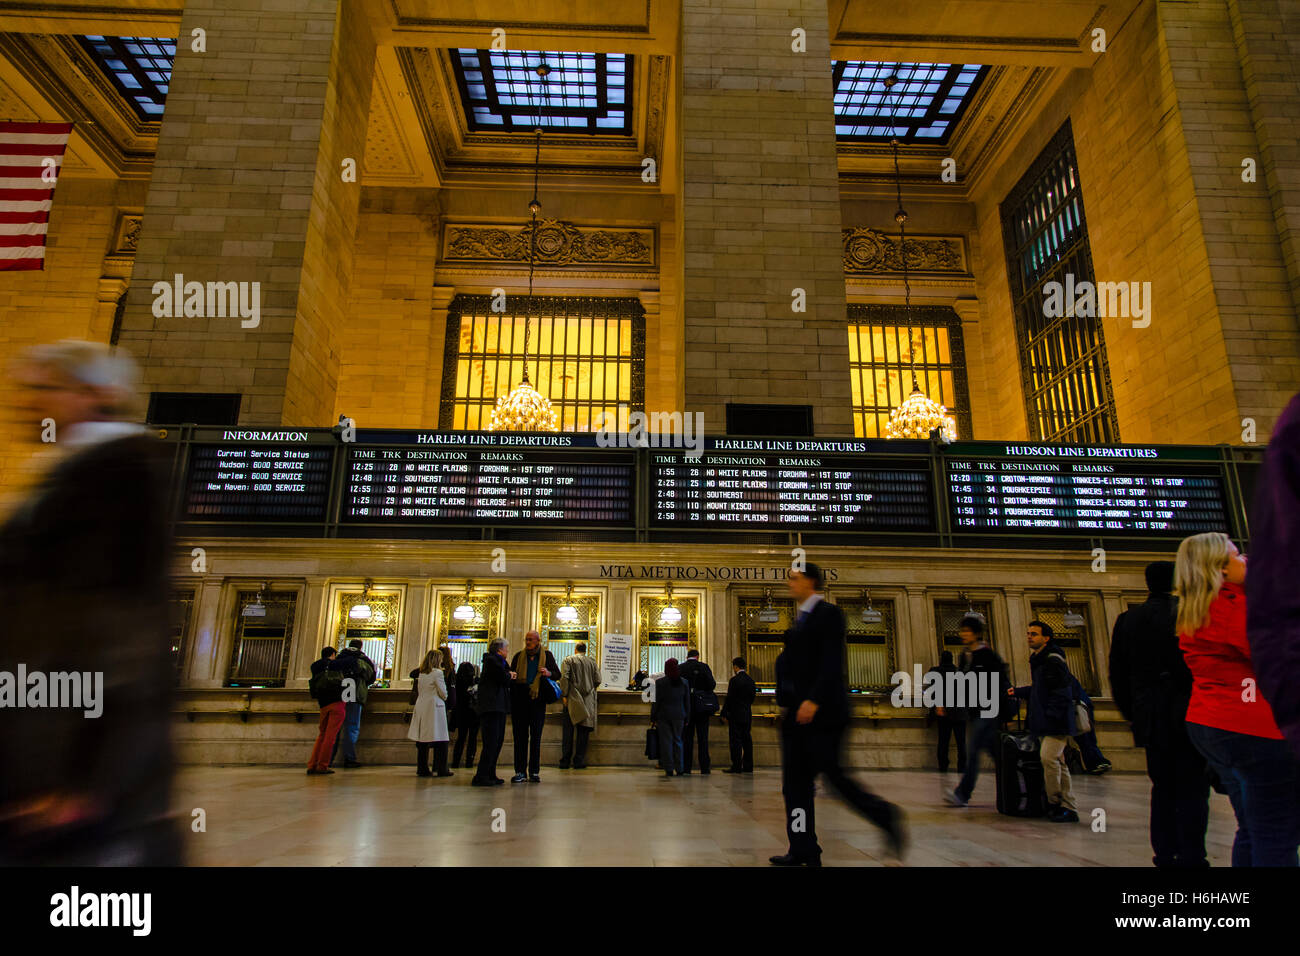 New-York - NOV 13: People buying train tickets in Grand Central Station in New-York, USA on November 13, 2012. Stock Photo